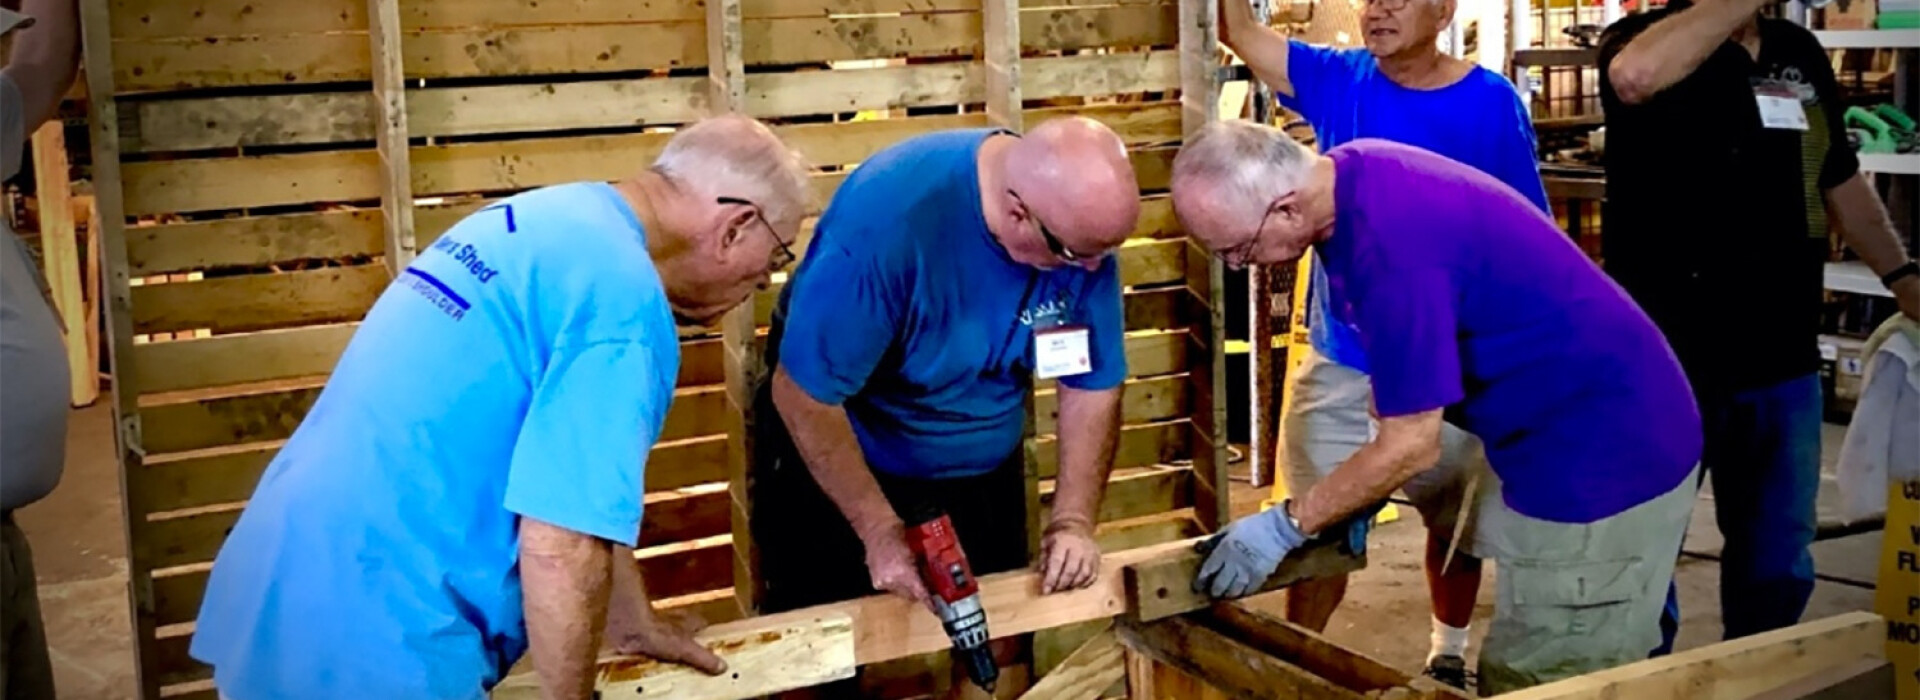 Building bandicoot shelters with the Men's Shed